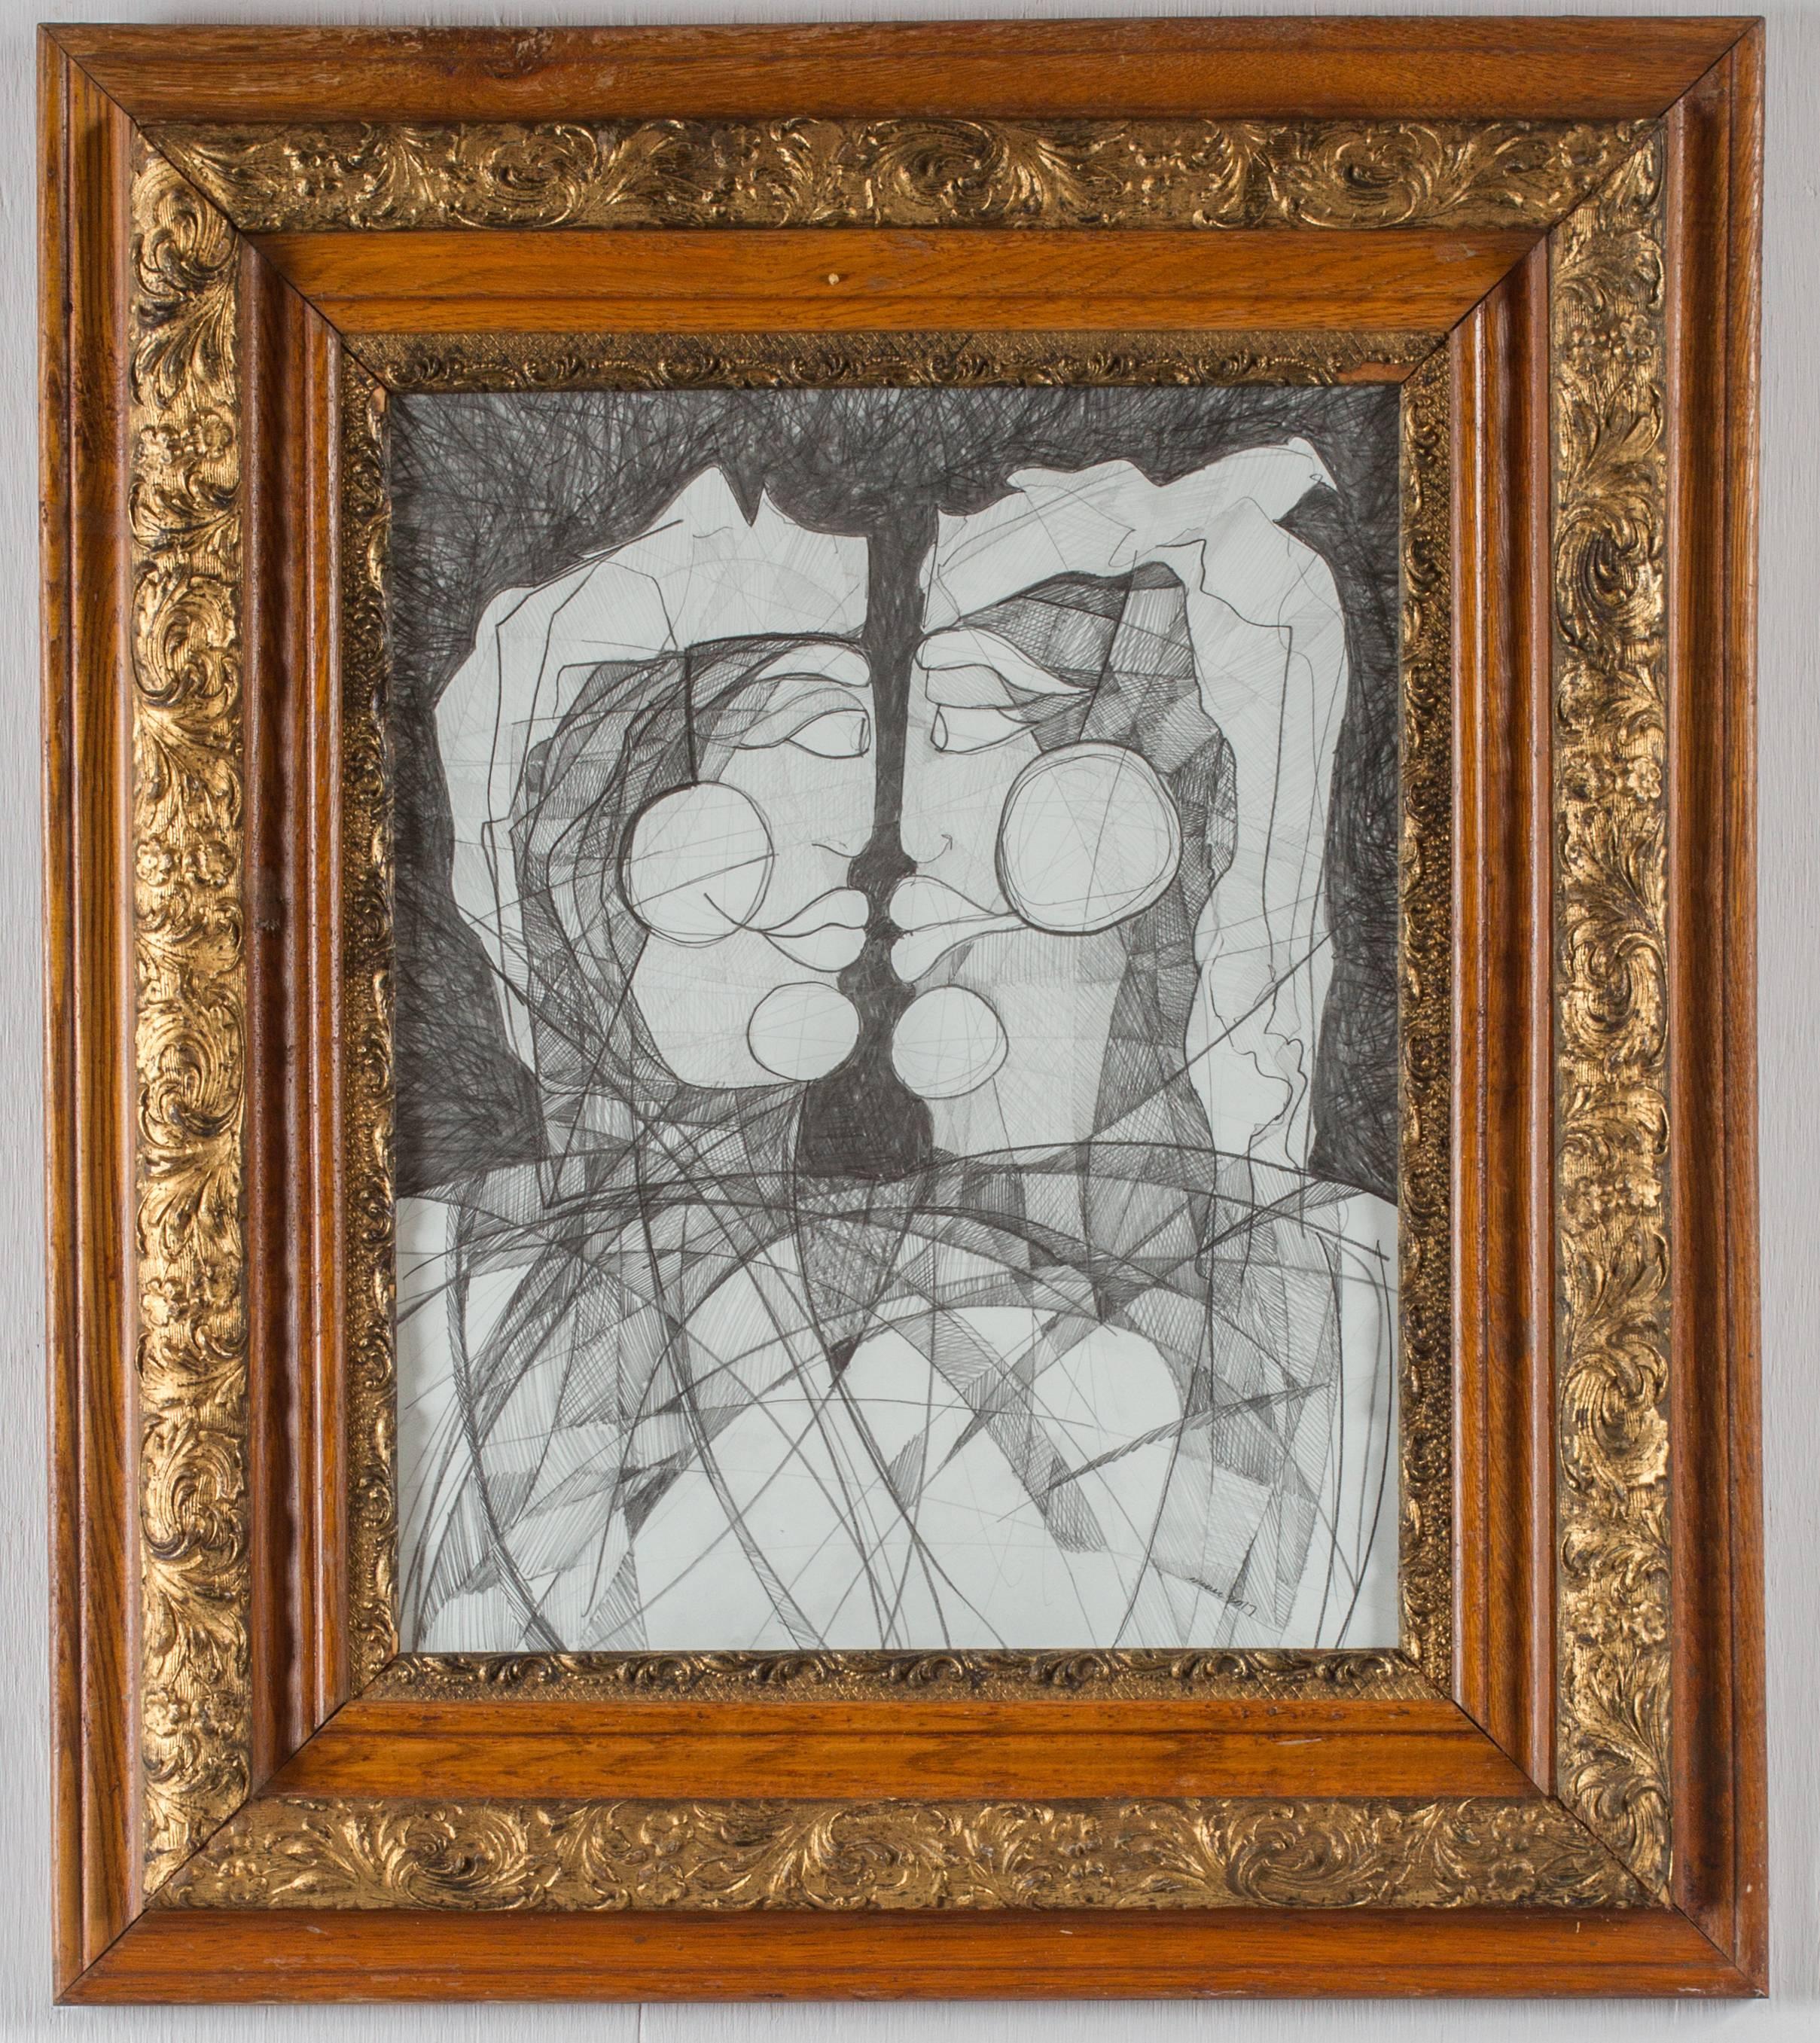 David Dew Bruner Abstract Drawing - Janus Woman #2 (Abstract Figurative Portrait Drawing on Paper in Antique Frame)